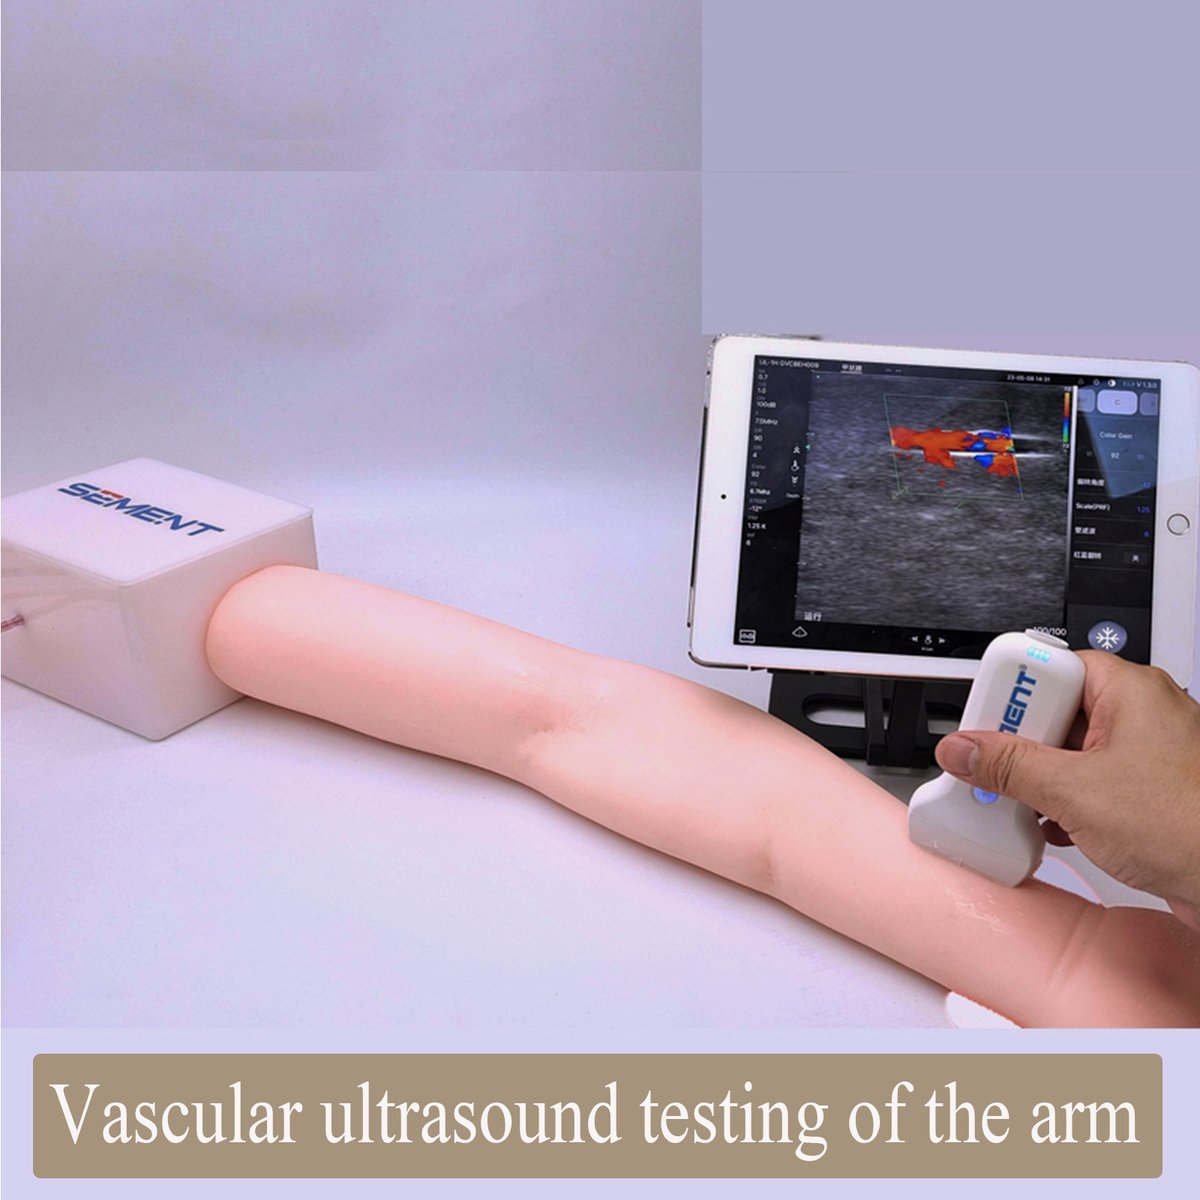 amazon.com/stores/page/1D…

#ultrasound #ultrasoundtech #ultrasoundstudent #ultrasoundcavitation #ultrasounds #4dultrasound #ultrasoundscan #loveultrasound #ultrasoundpicture #ultrasoundtherapy #ultrasoundtechnician #ultrasoundtechnology #ultrasoundschool #medical #medicalstudent